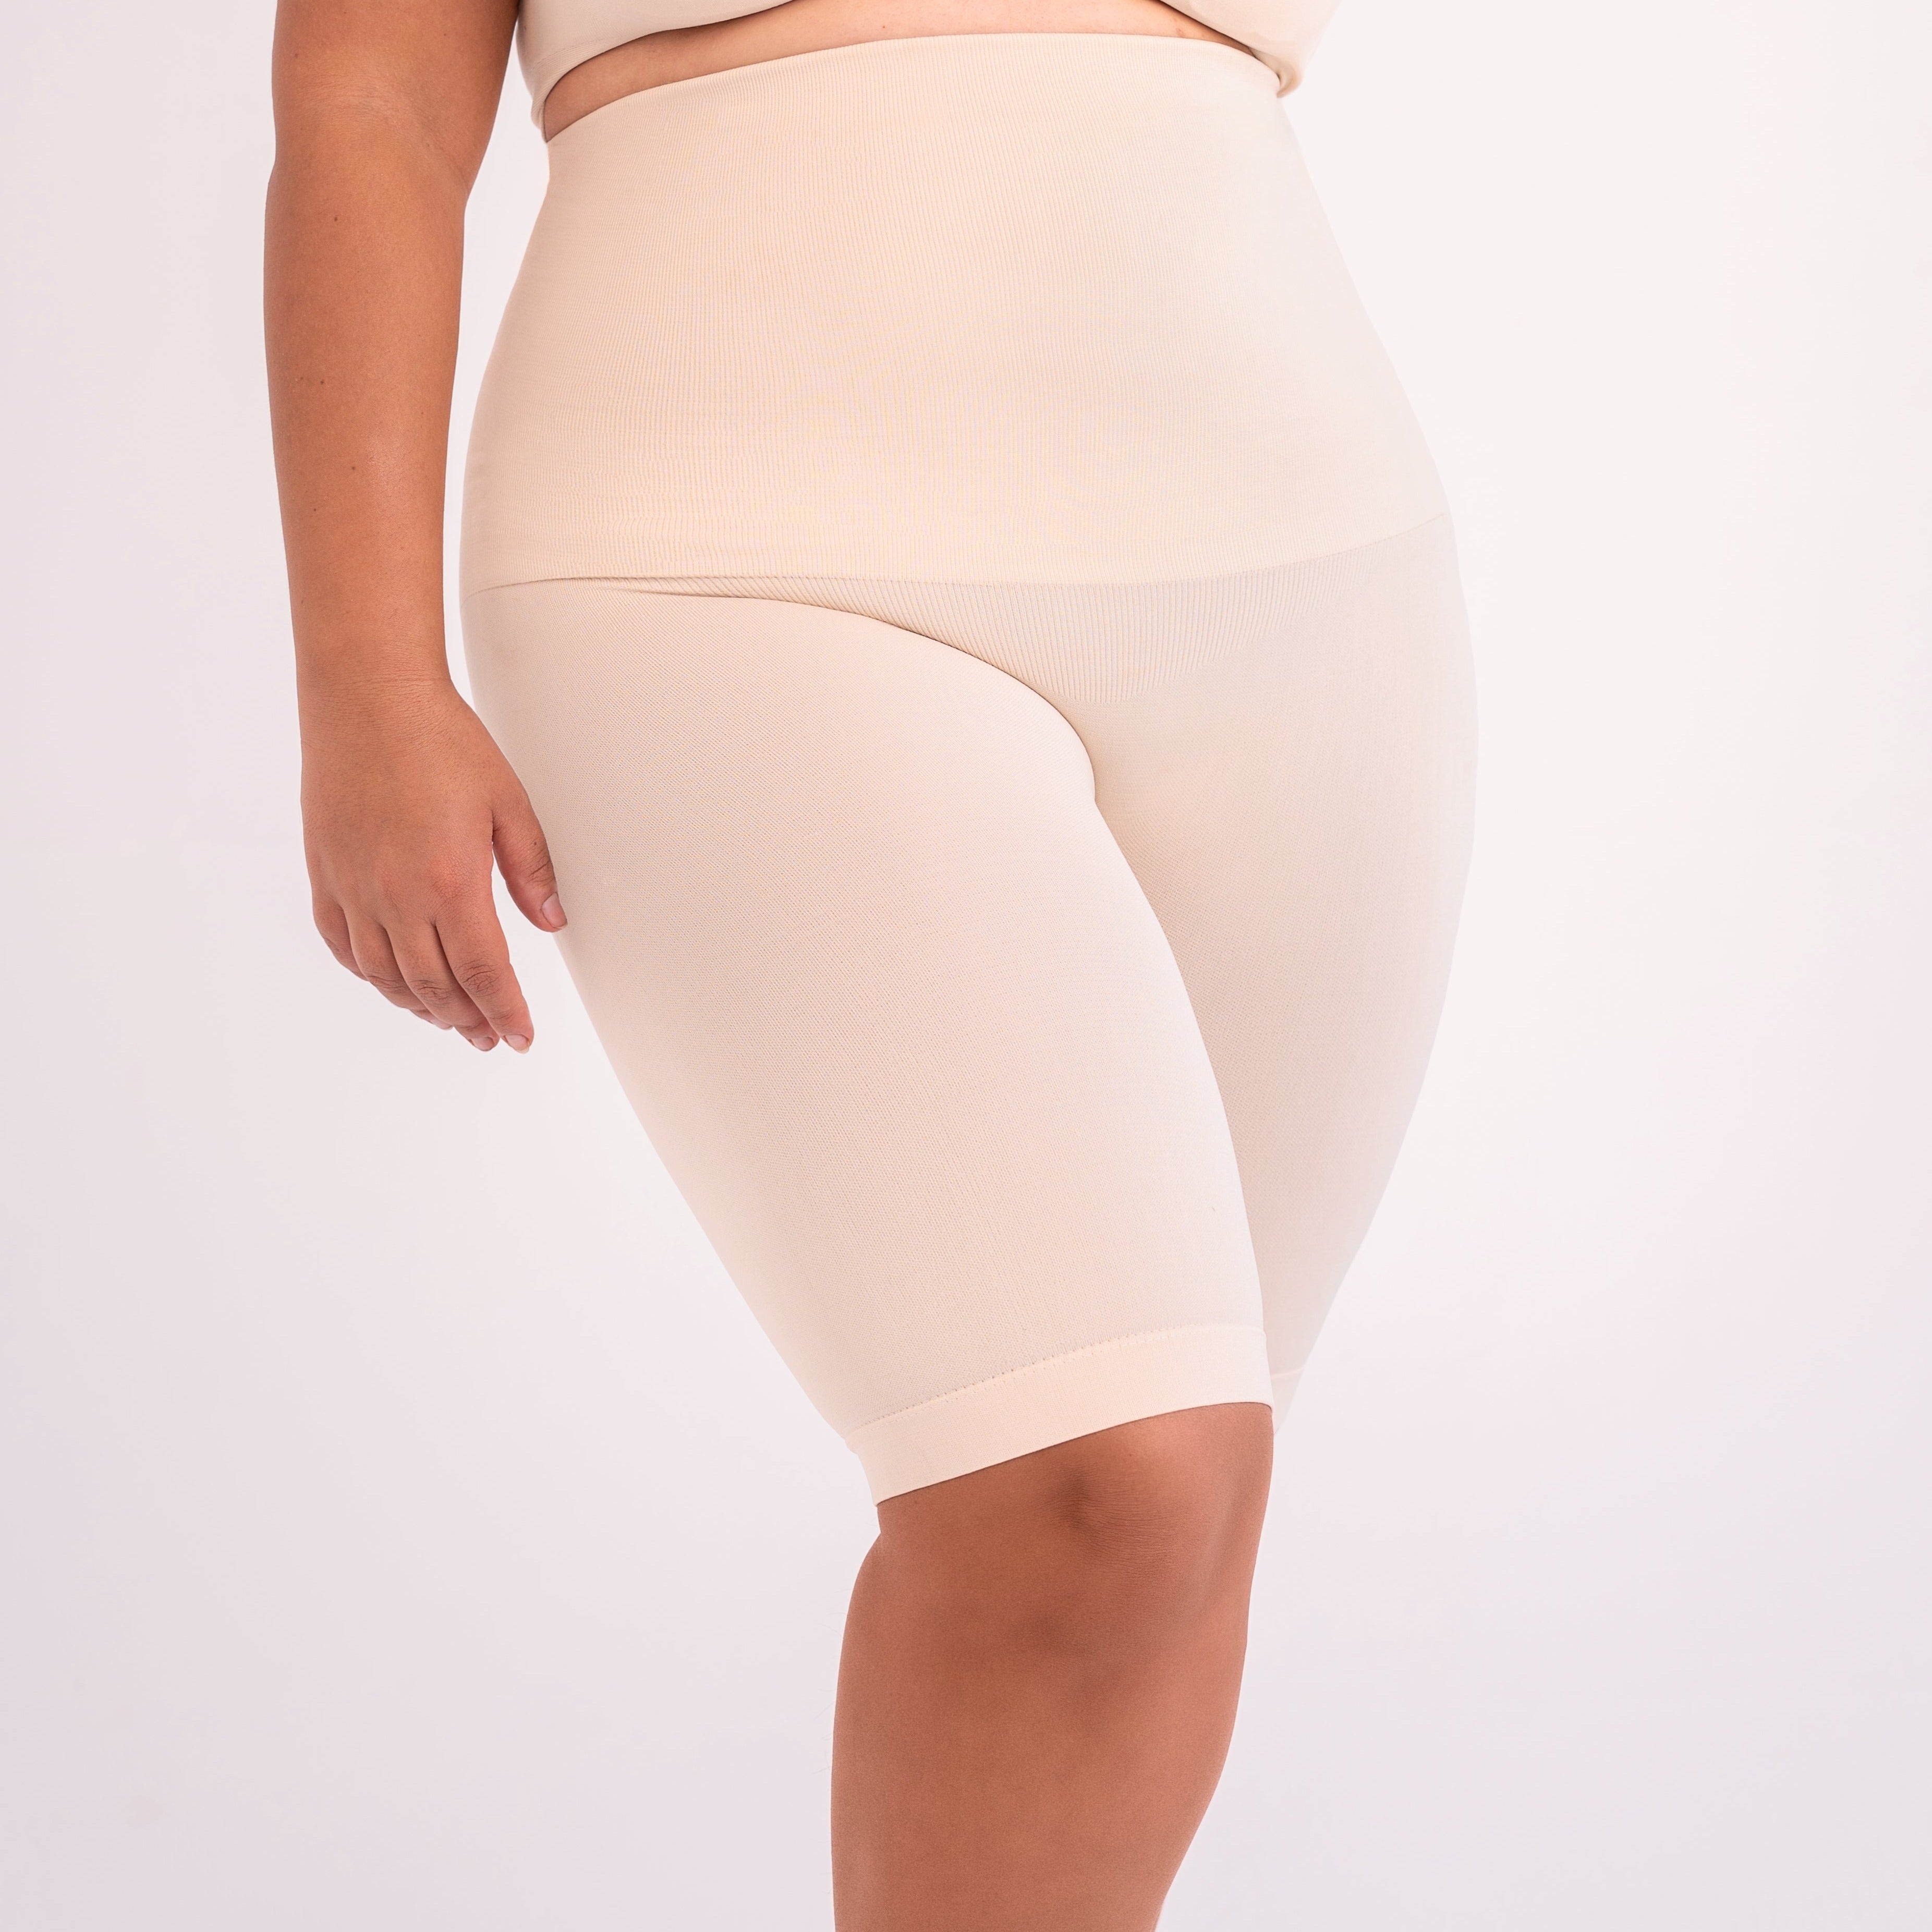 Everyday Empower Mesh Shaper Shorts Review